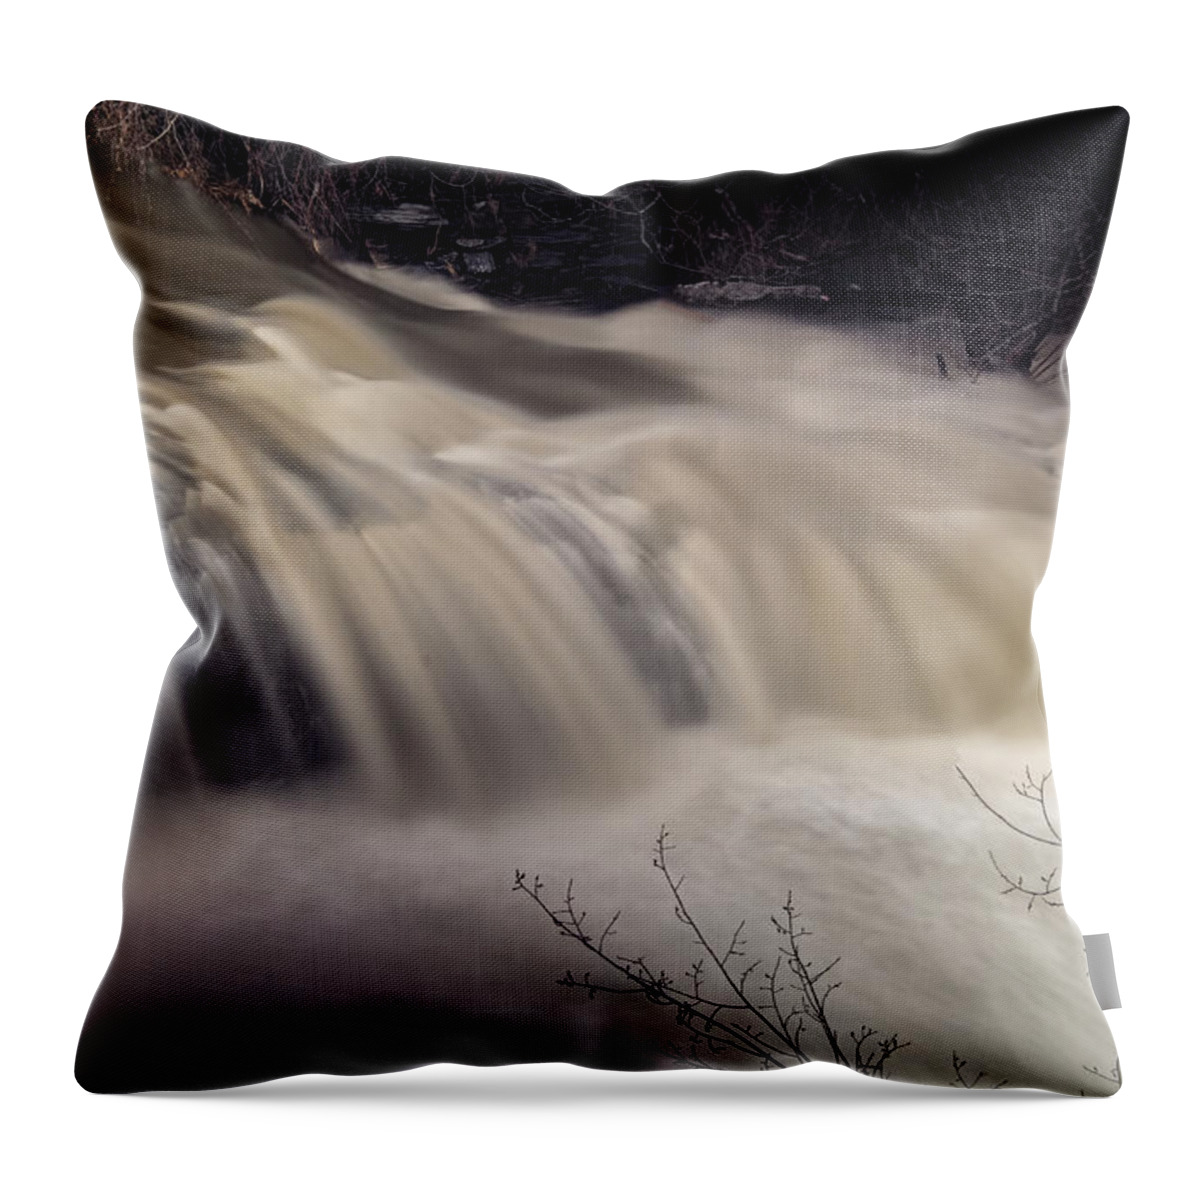 Whetstone Brook Throw Pillow featuring the photograph Whetstone Brook Angry by Tom Singleton